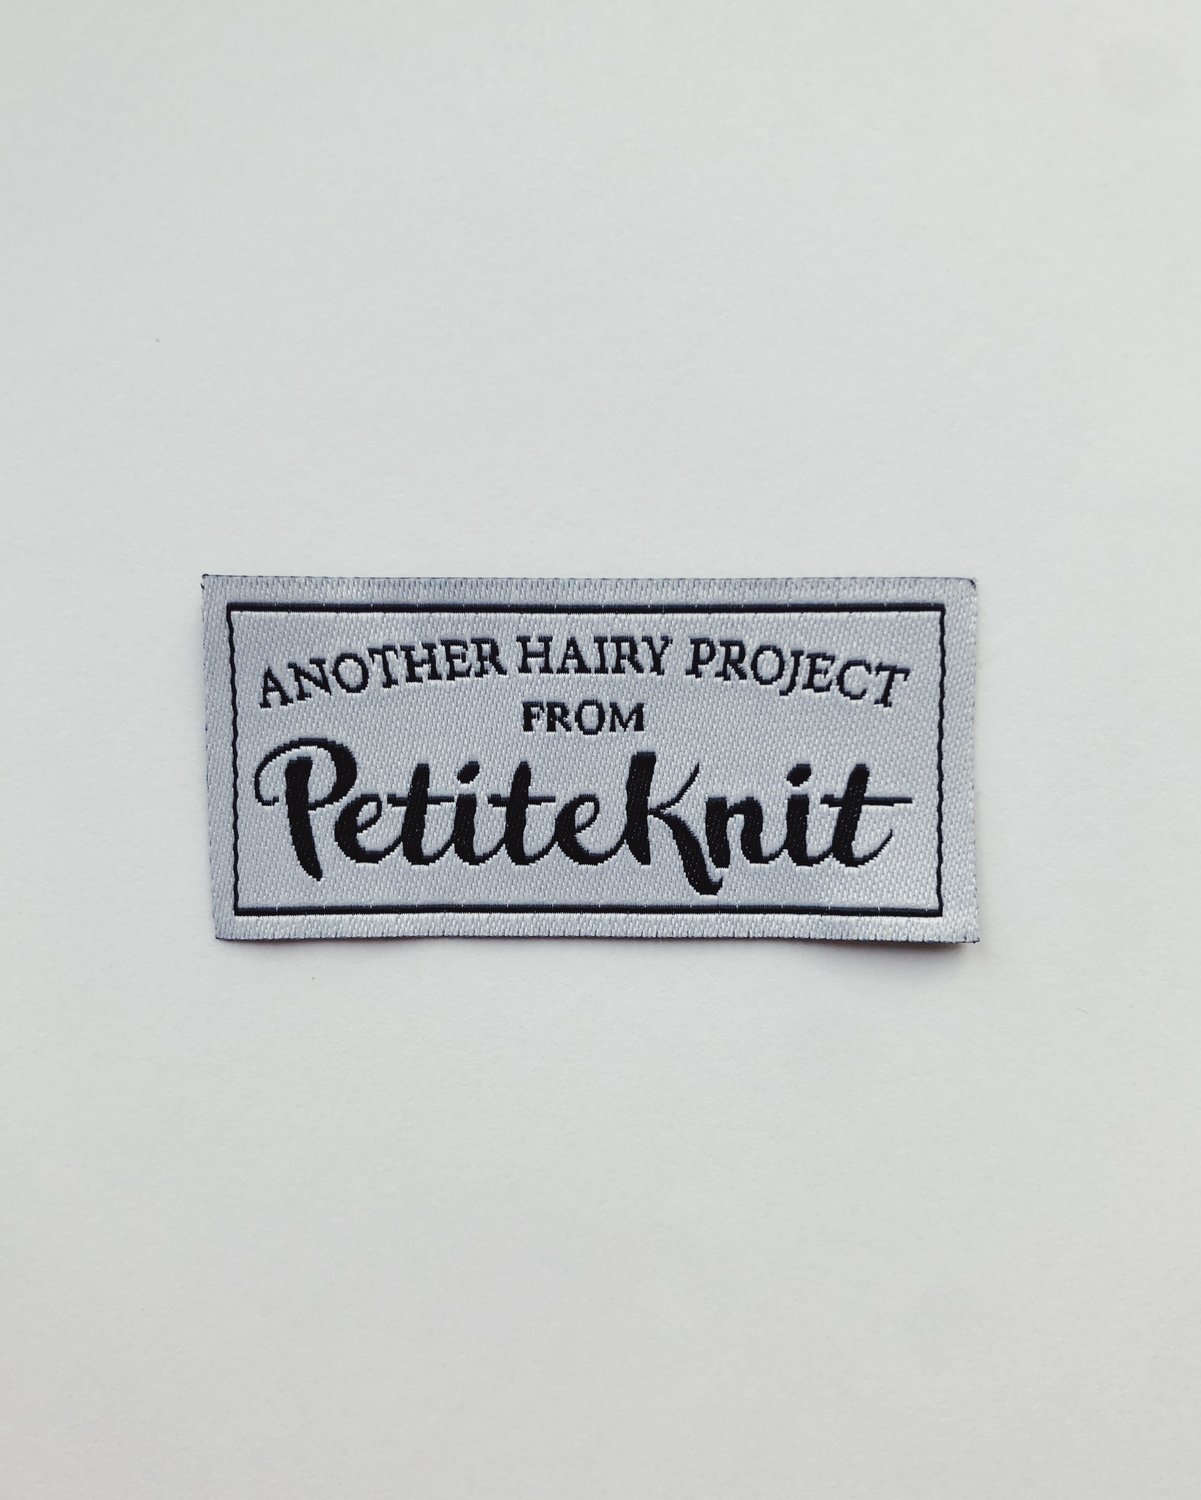 Label "Another hairy project"